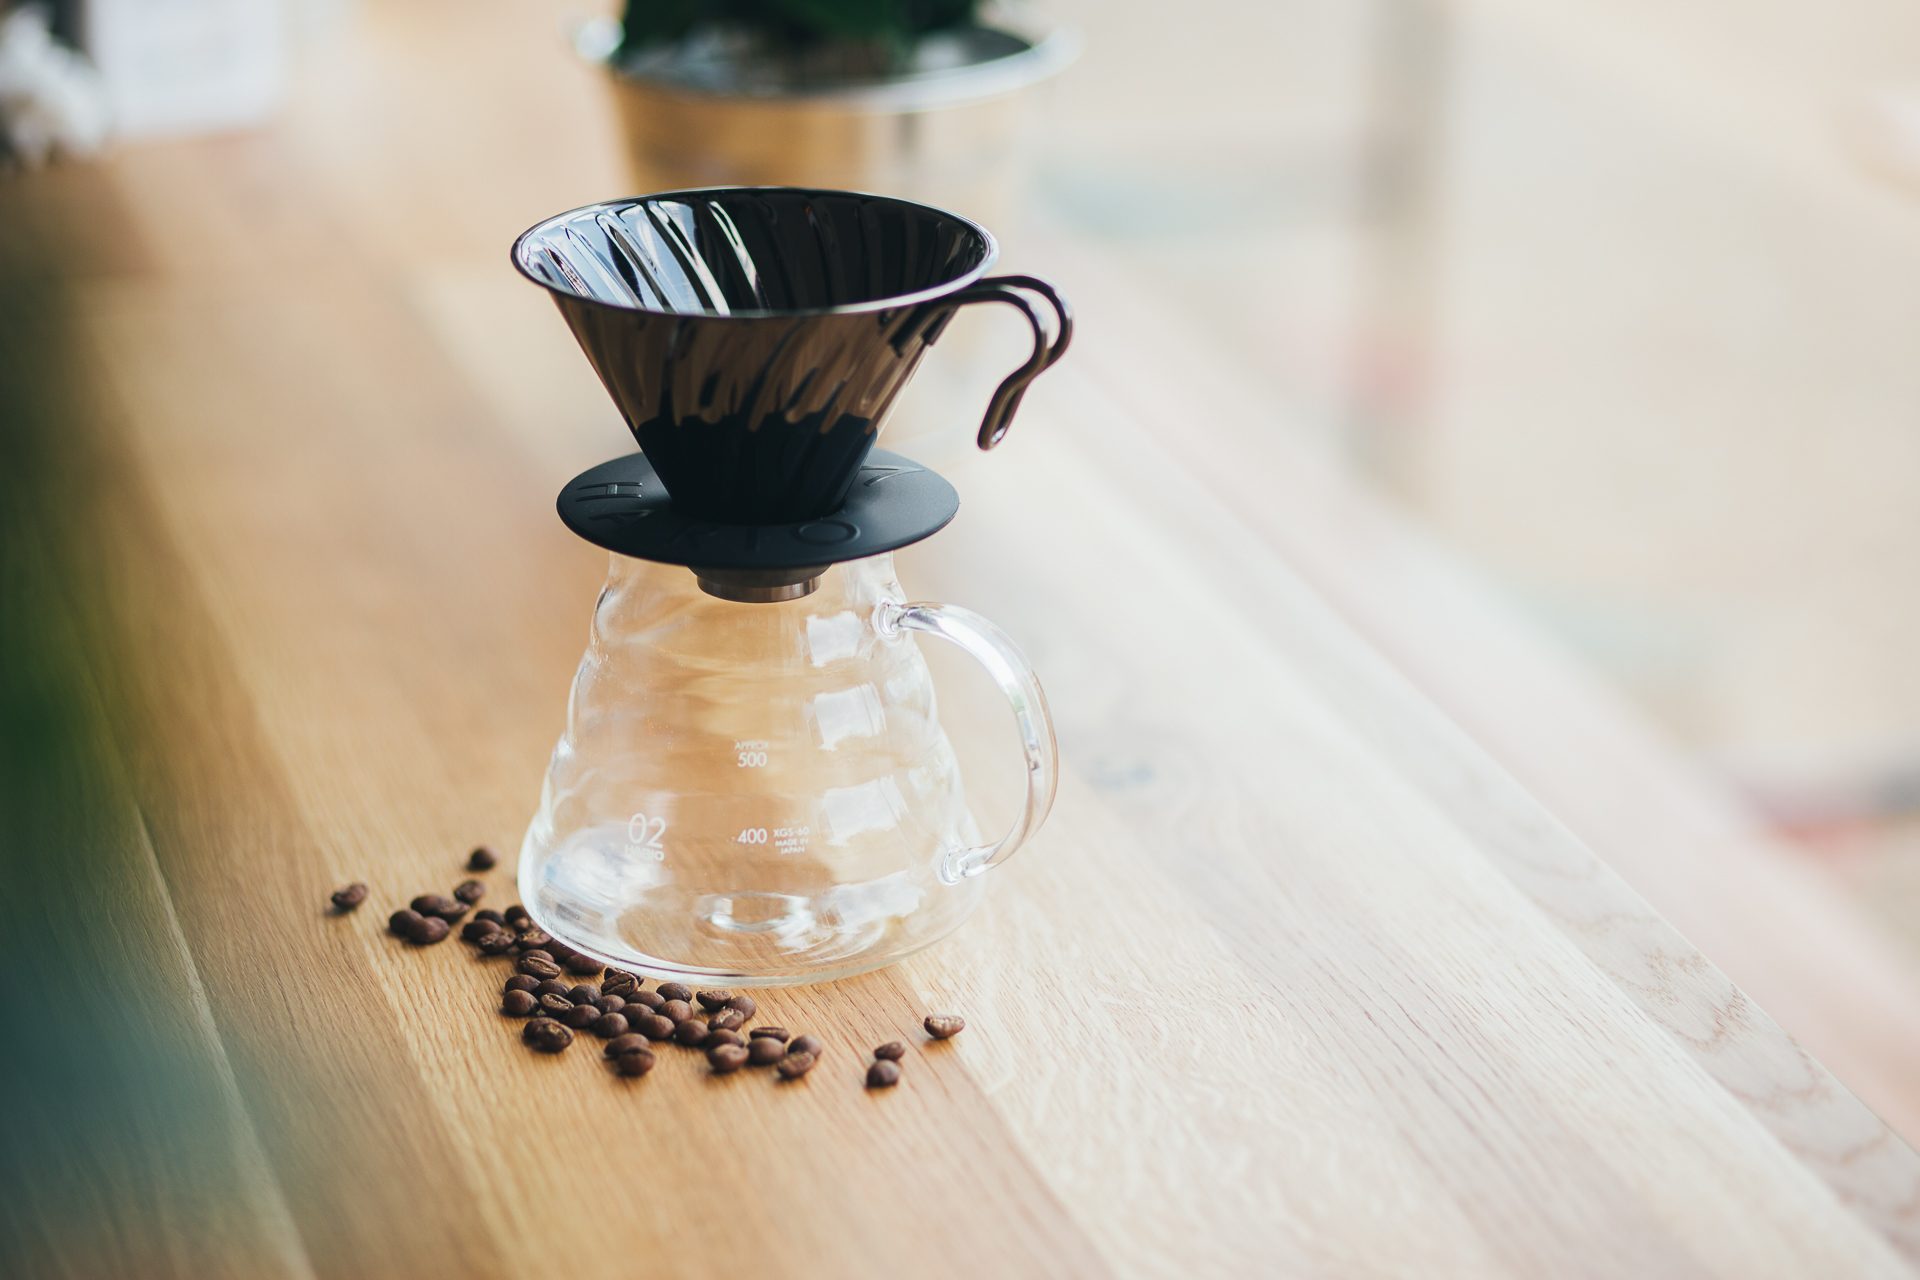 Timemore Espresso and Pour Over Scale Review 